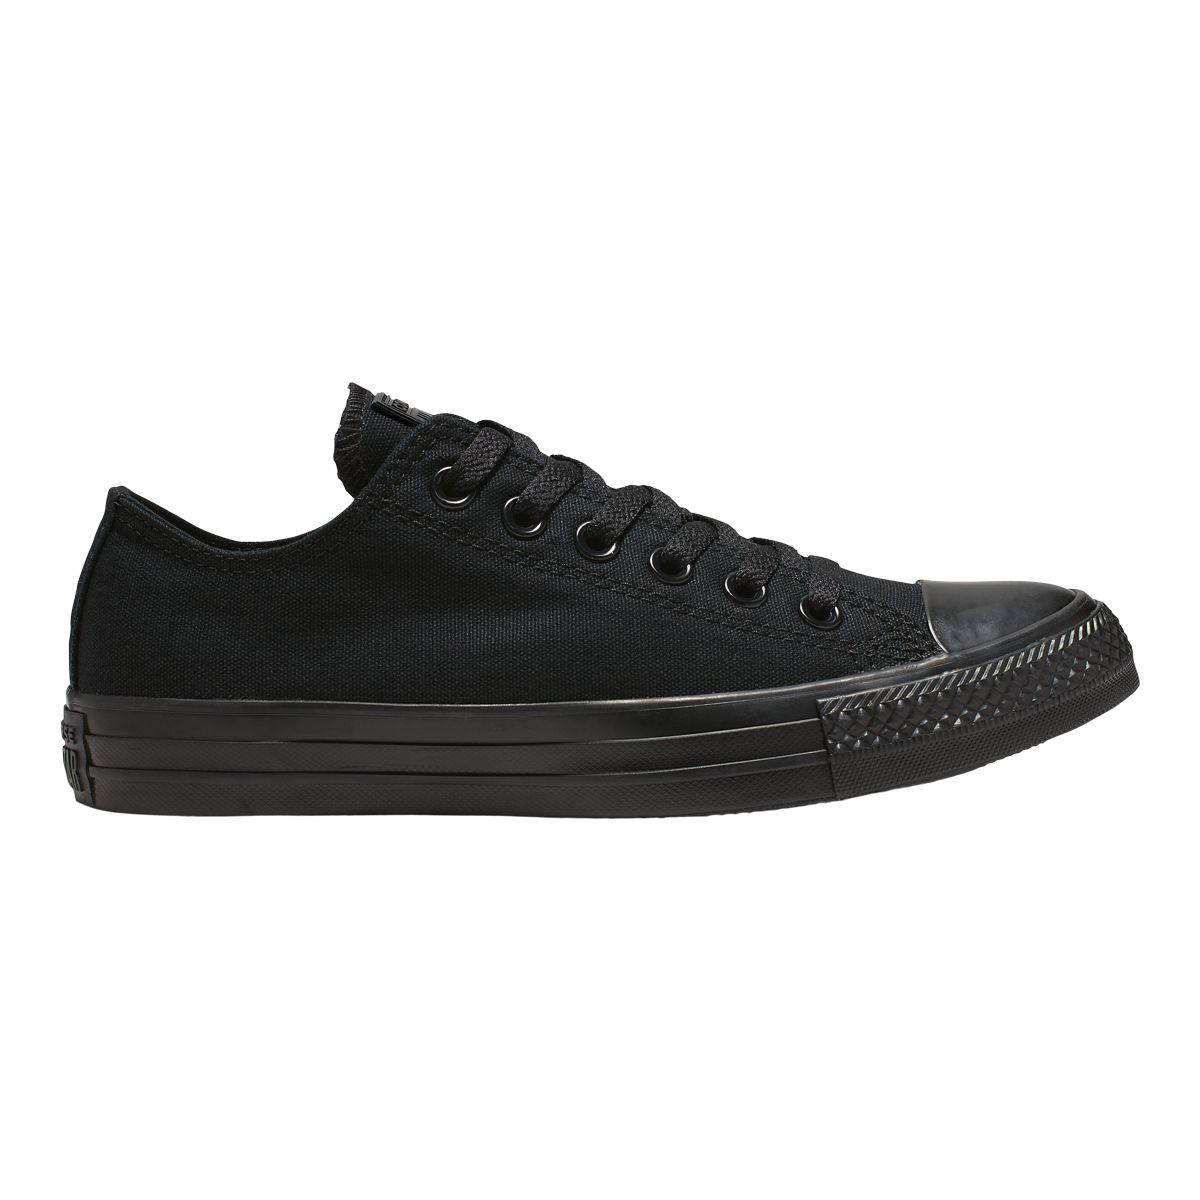 Image of Converse Women's Chuck Taylor Ox Shoes Sneakers